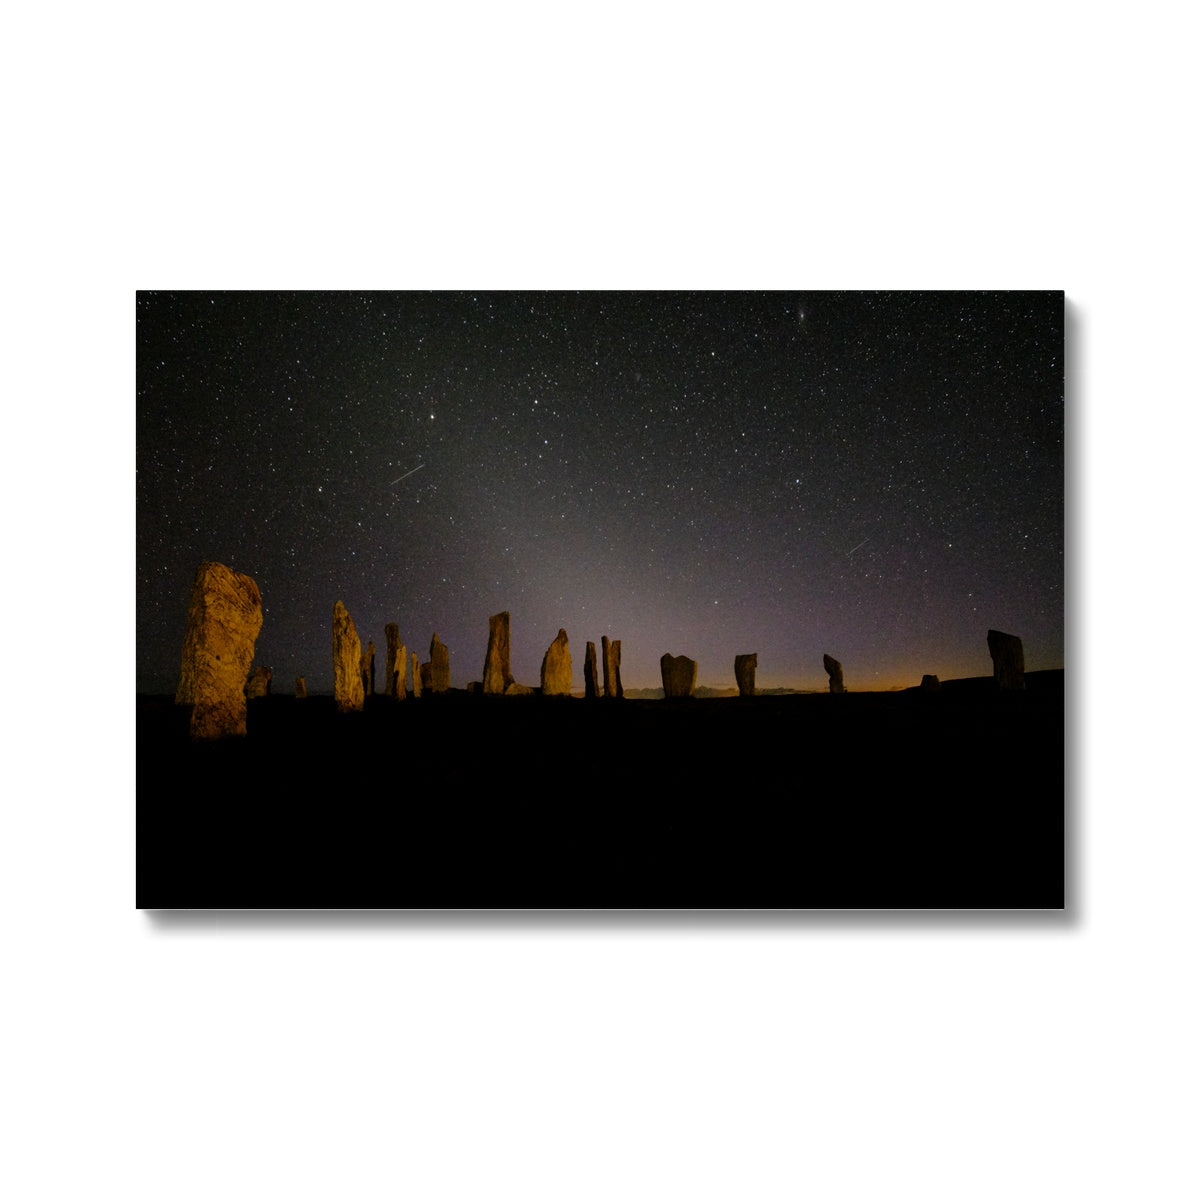 Callanish and Zodiacal light Canvas